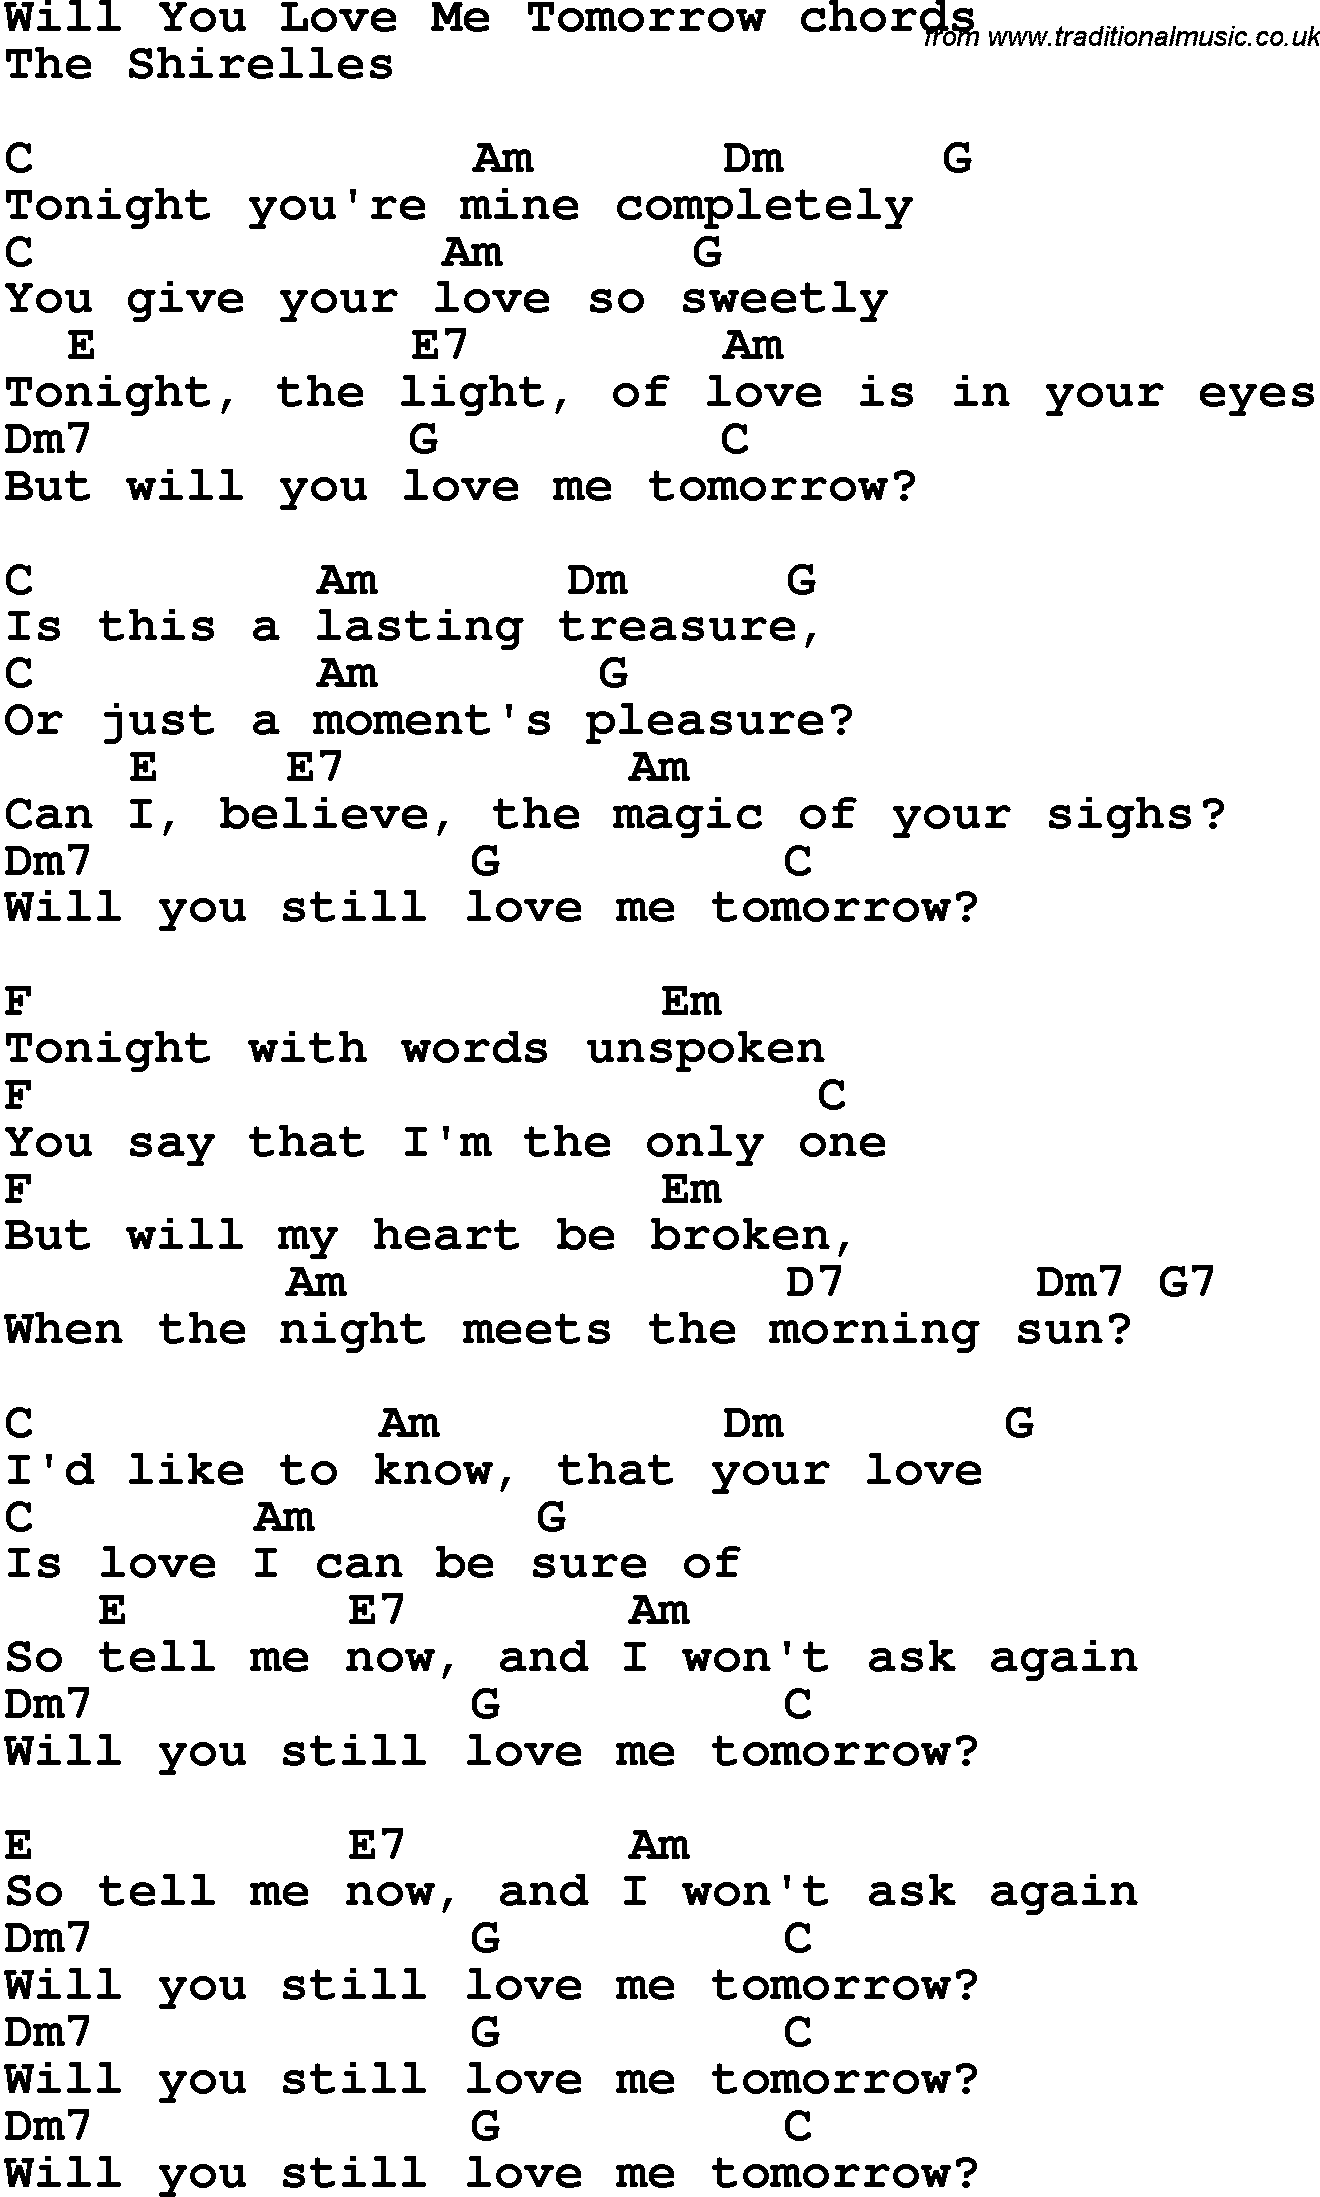 Song Lyrics with guitar chords for Will You Love Me Tomorrow